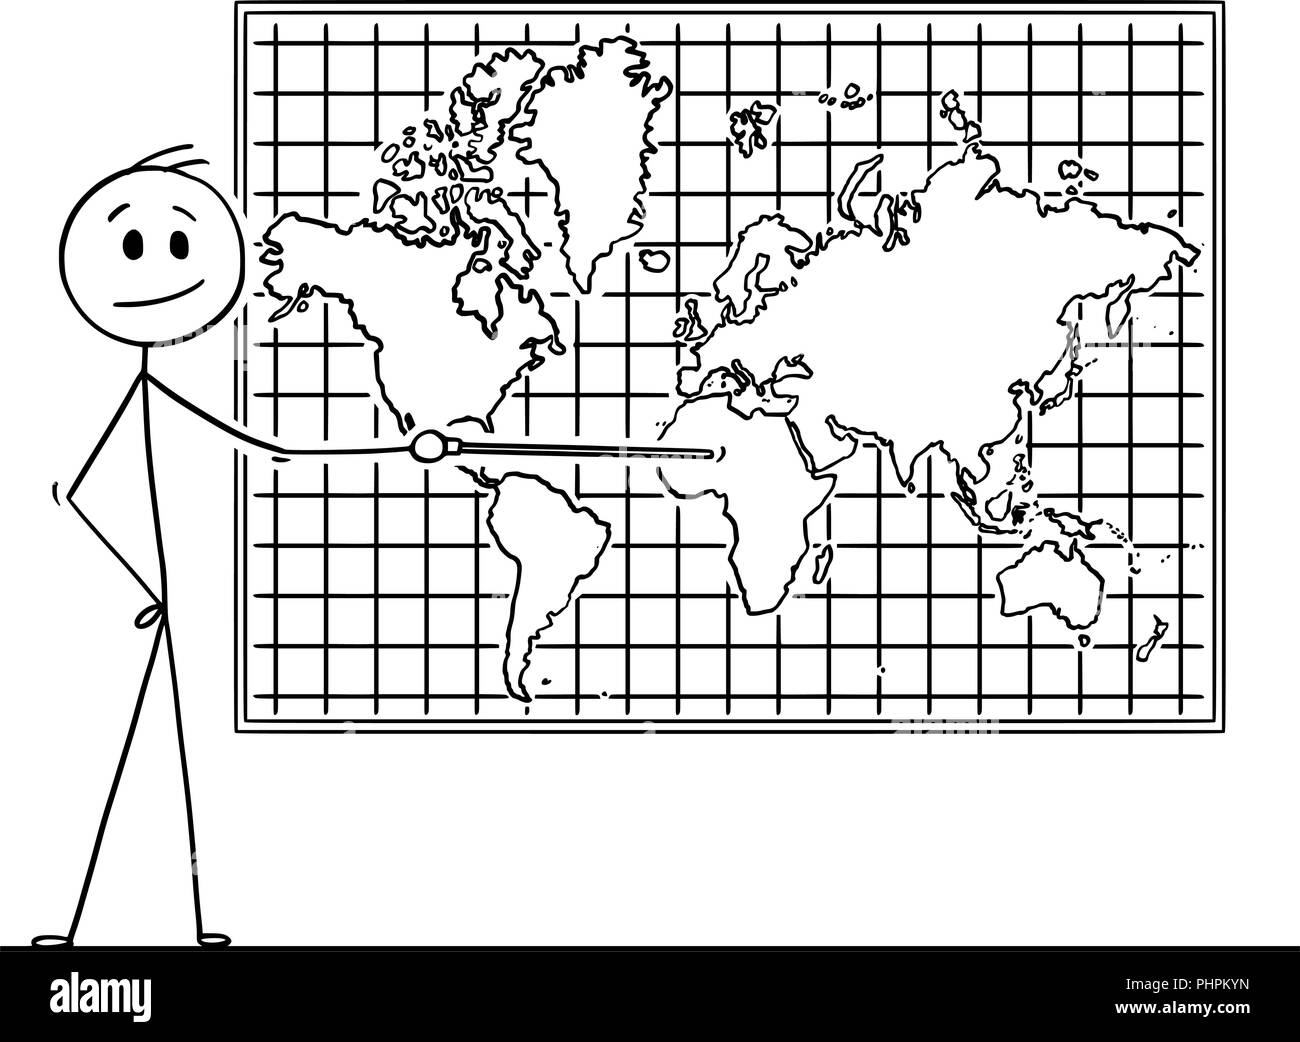 Cartoon of Man Pointing at Africa Continent on Wall World Map Stock Vector